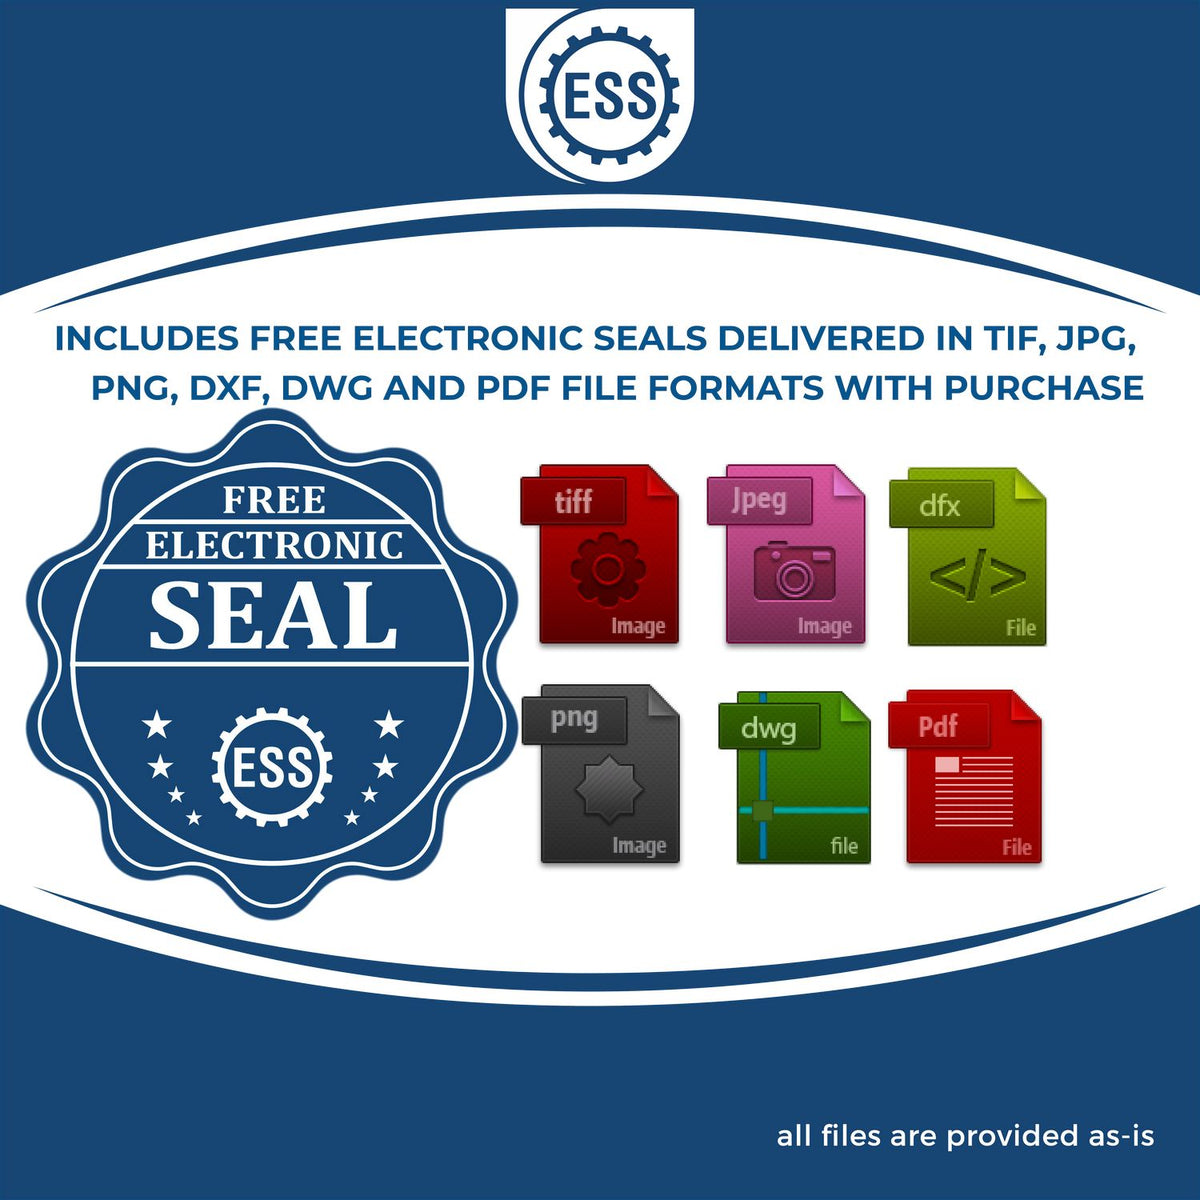 An infographic for the free electronic seal for the Gift Mississippi Land Surveyor Seal illustrating the different file type icons such as DXF, DWG, TIF, JPG and PNG.